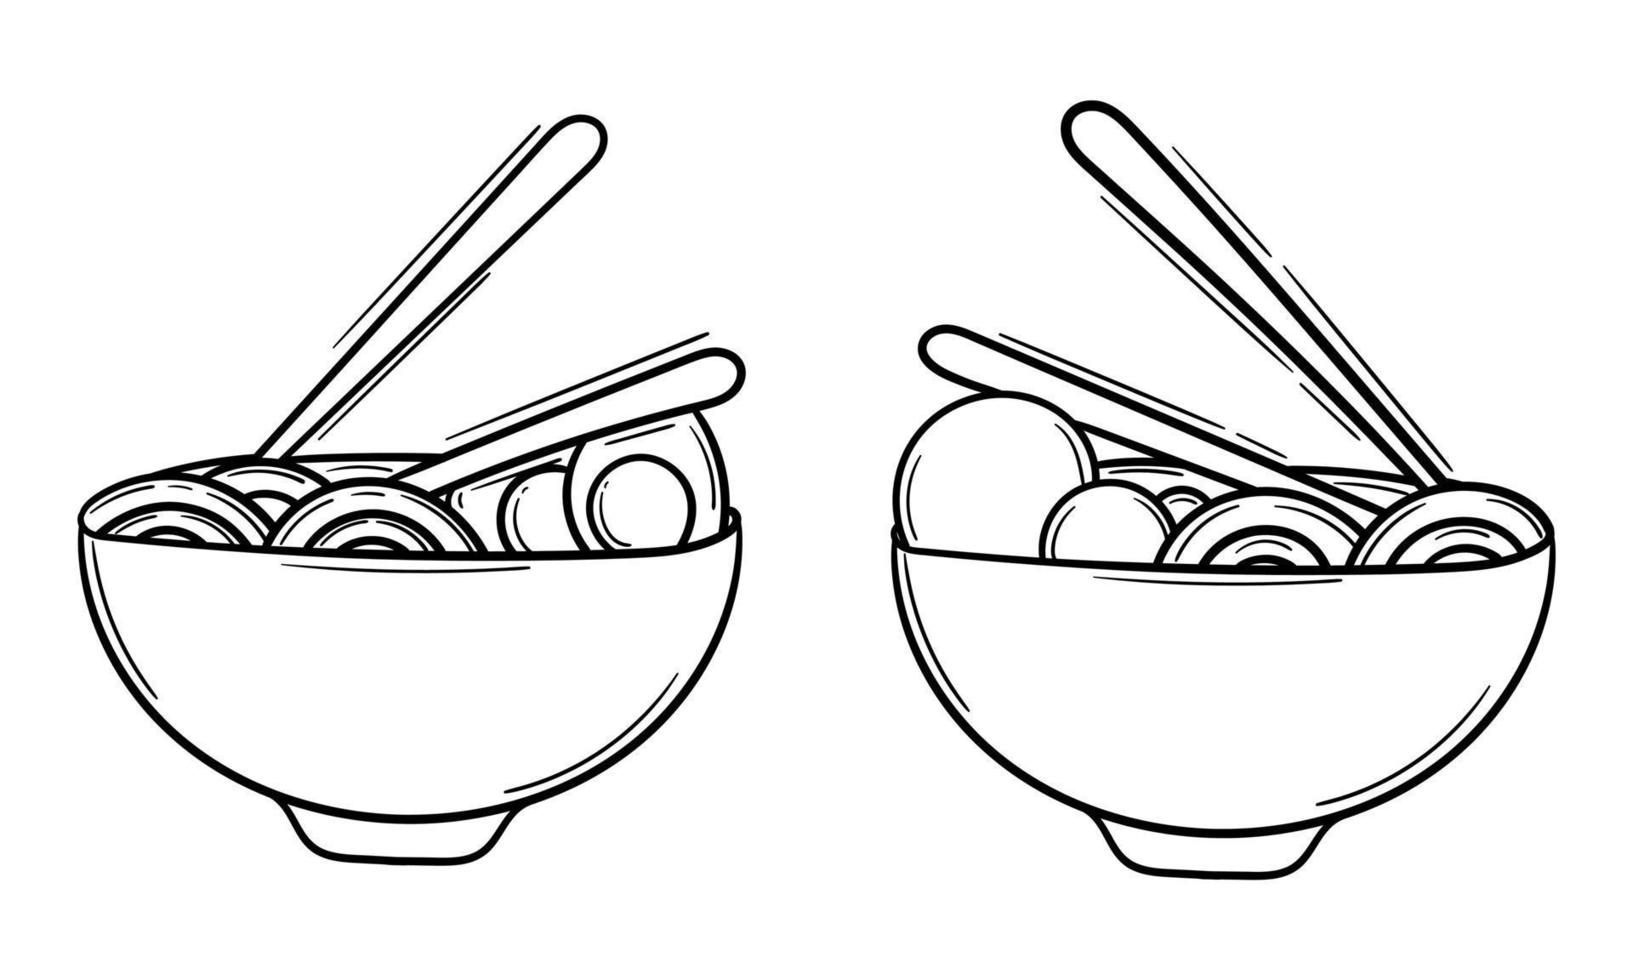 hand drawn illustration of noodles and eggs, and noodles and meatballs vector